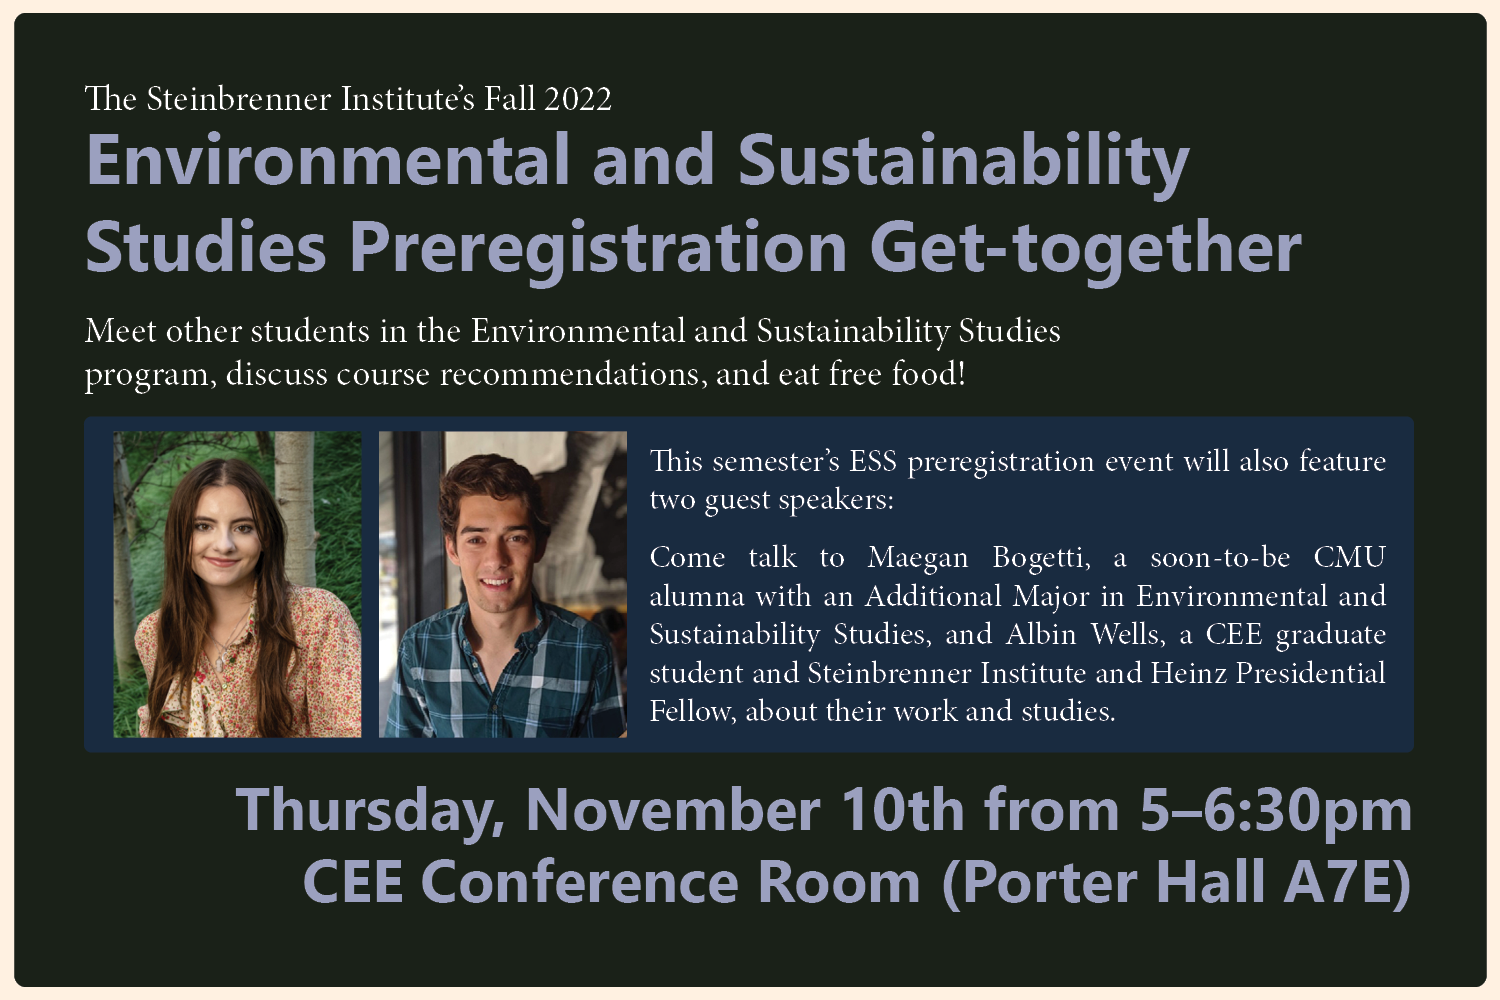 Fall 2022 Environmental and Sustainability Studies Pre-registration Event Flyer